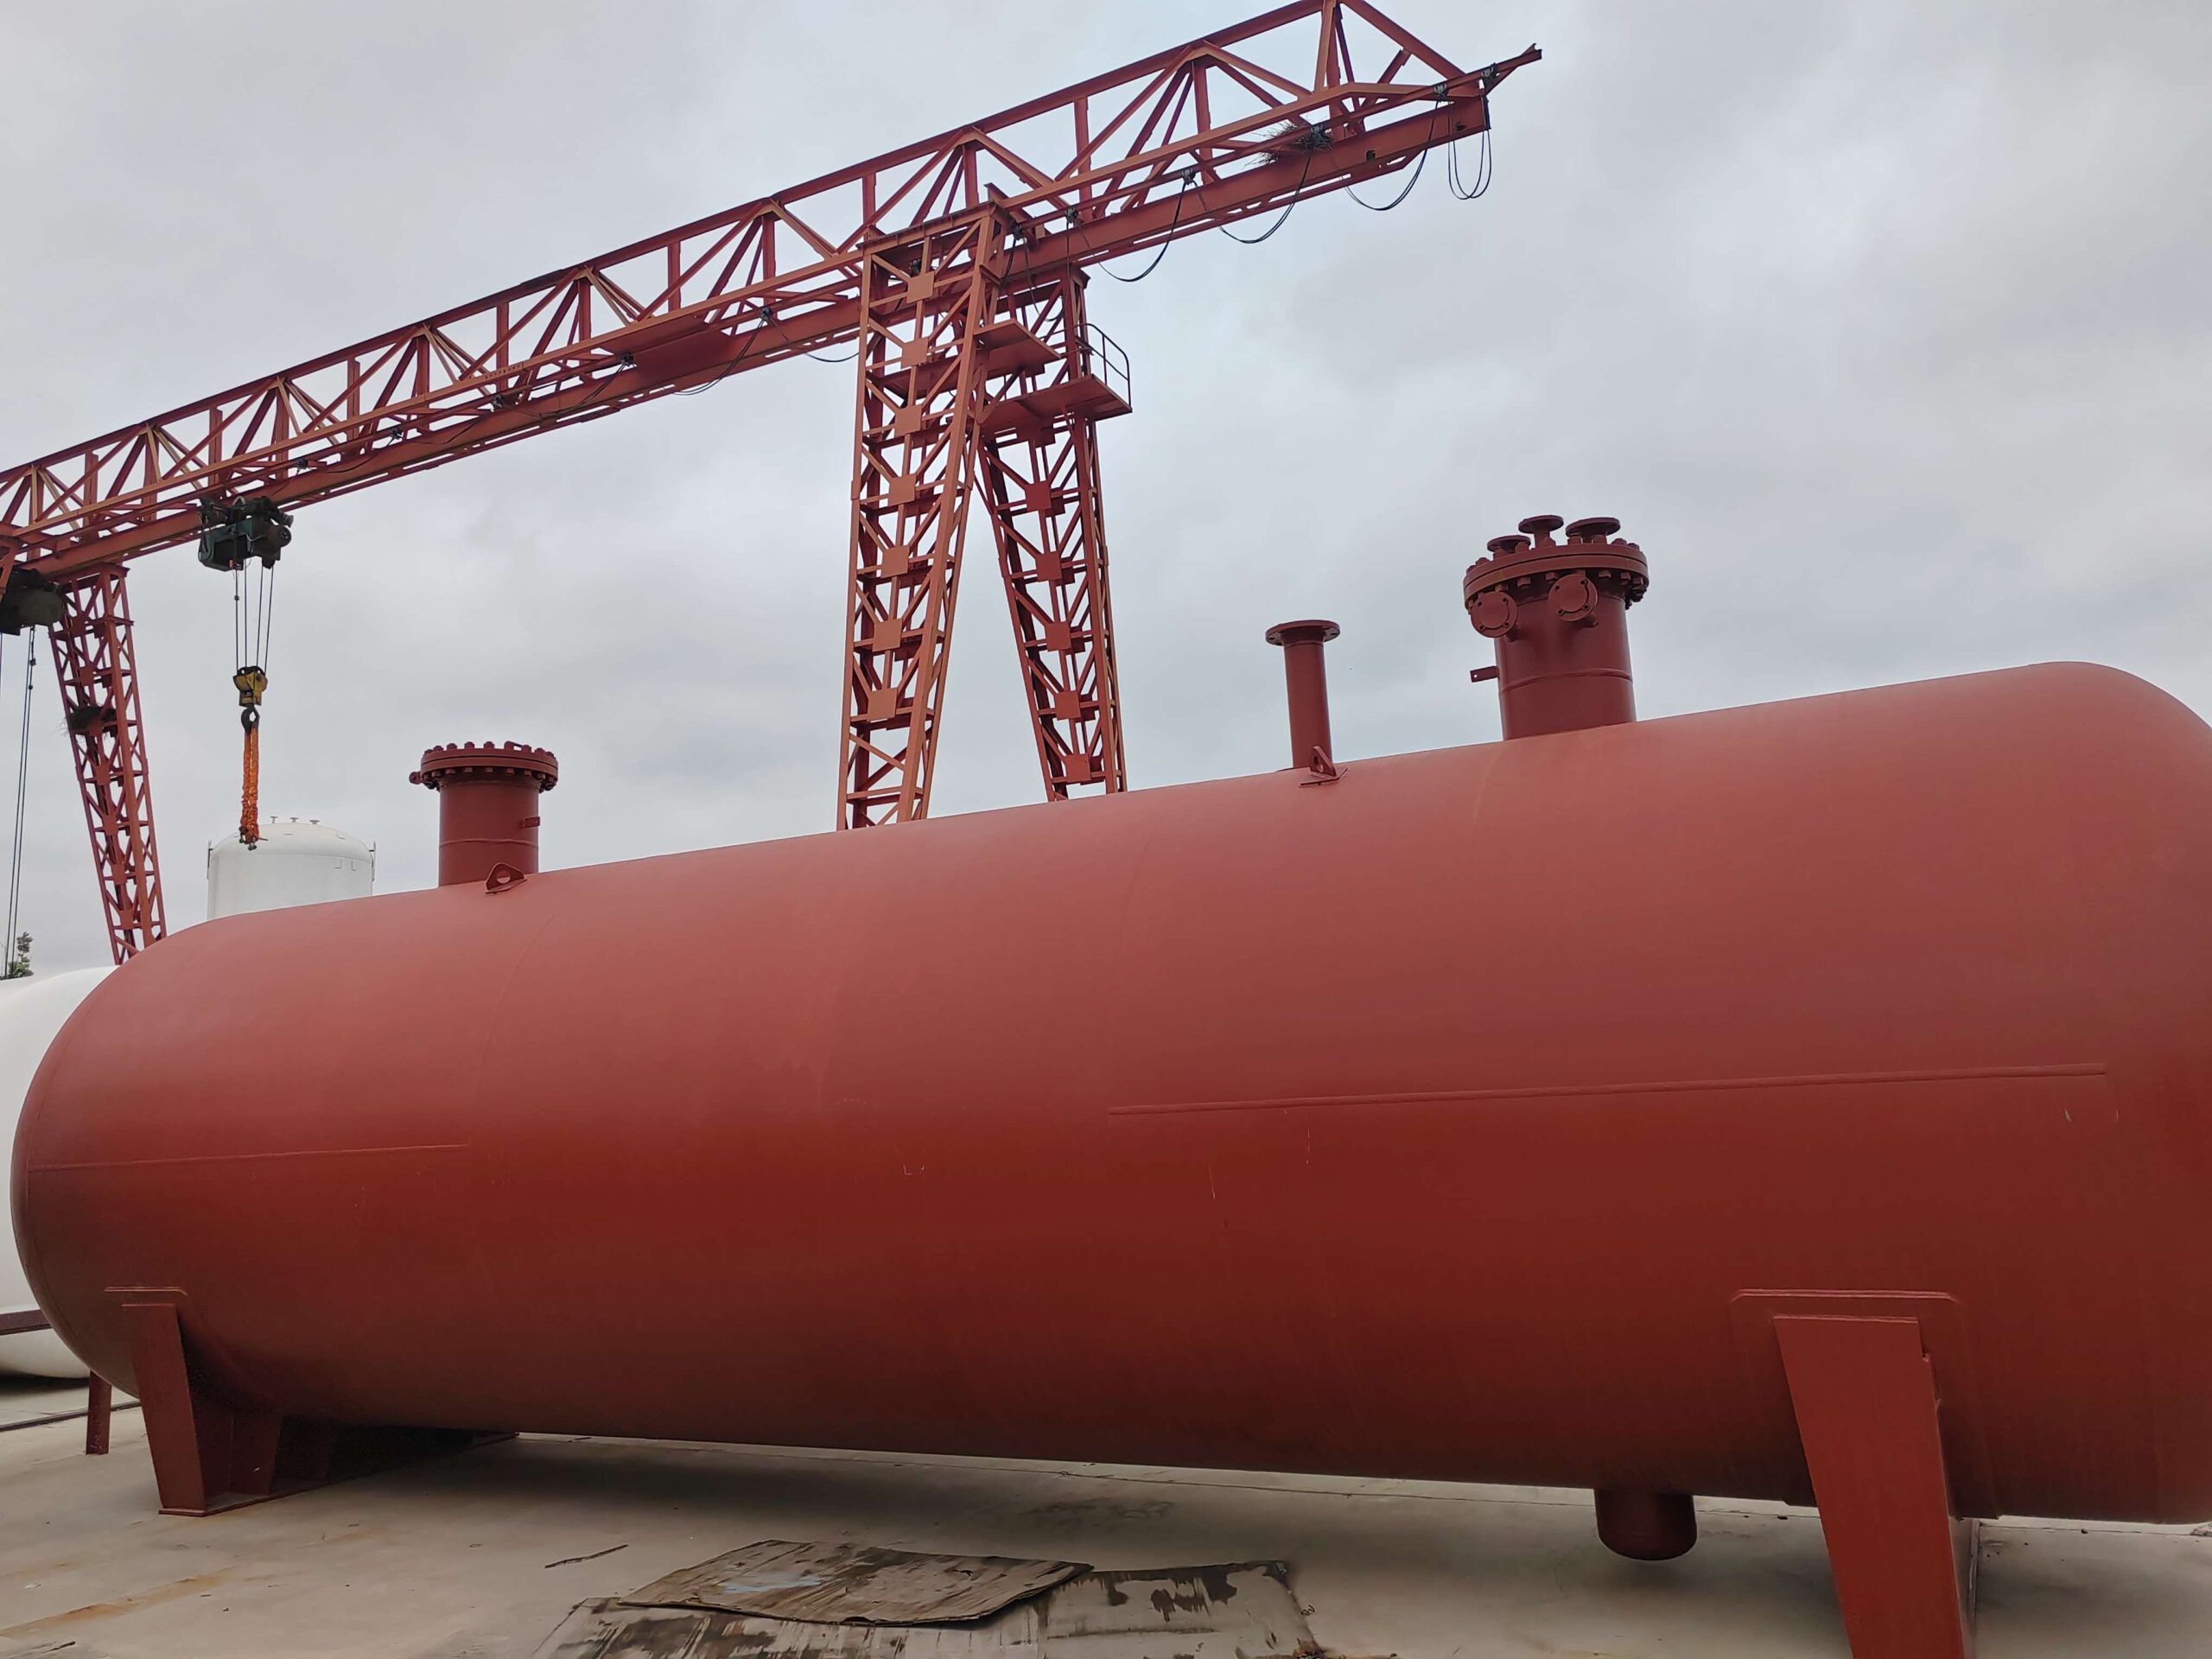 Operating conditions of liquefied gas storage tanks